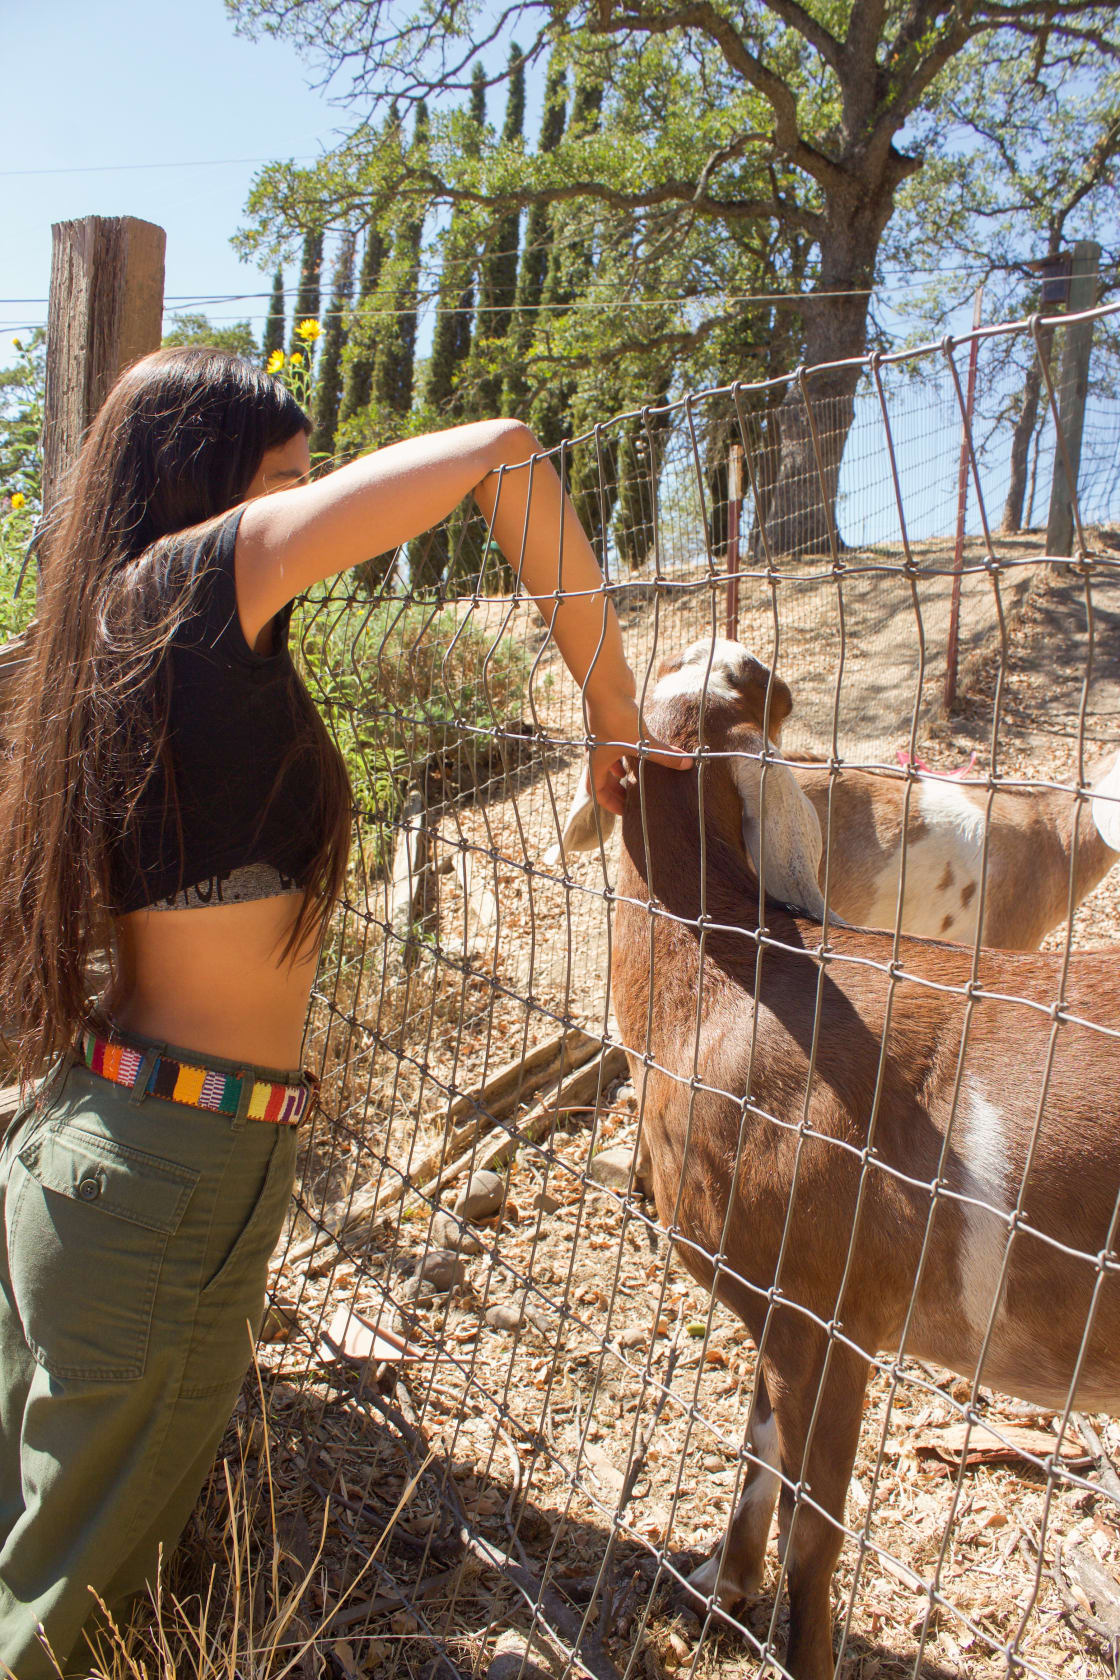 Besides the horses that were roaming free, we got to see and hang out with some of the goats on the property as well! Loved being able to be just steps from nature and animals at this place. 